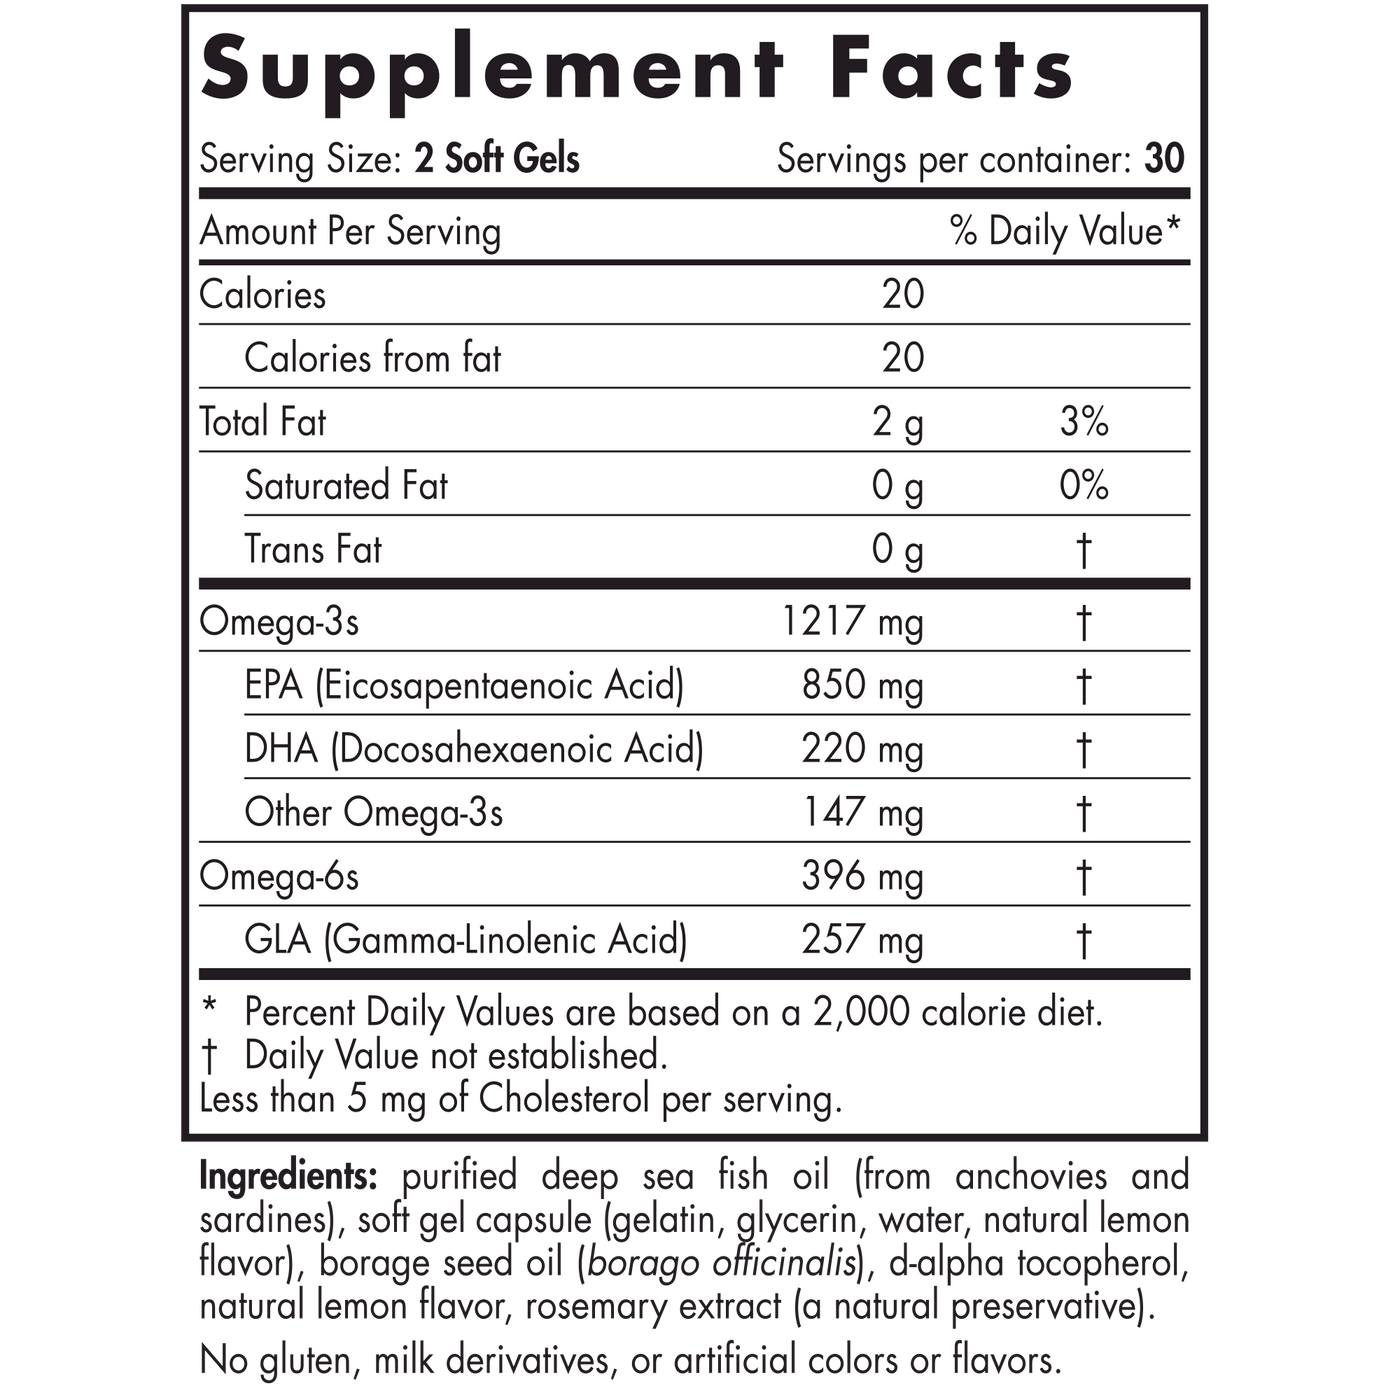 ProEPA w/Concentrated GLA 60 gels Curated Wellness